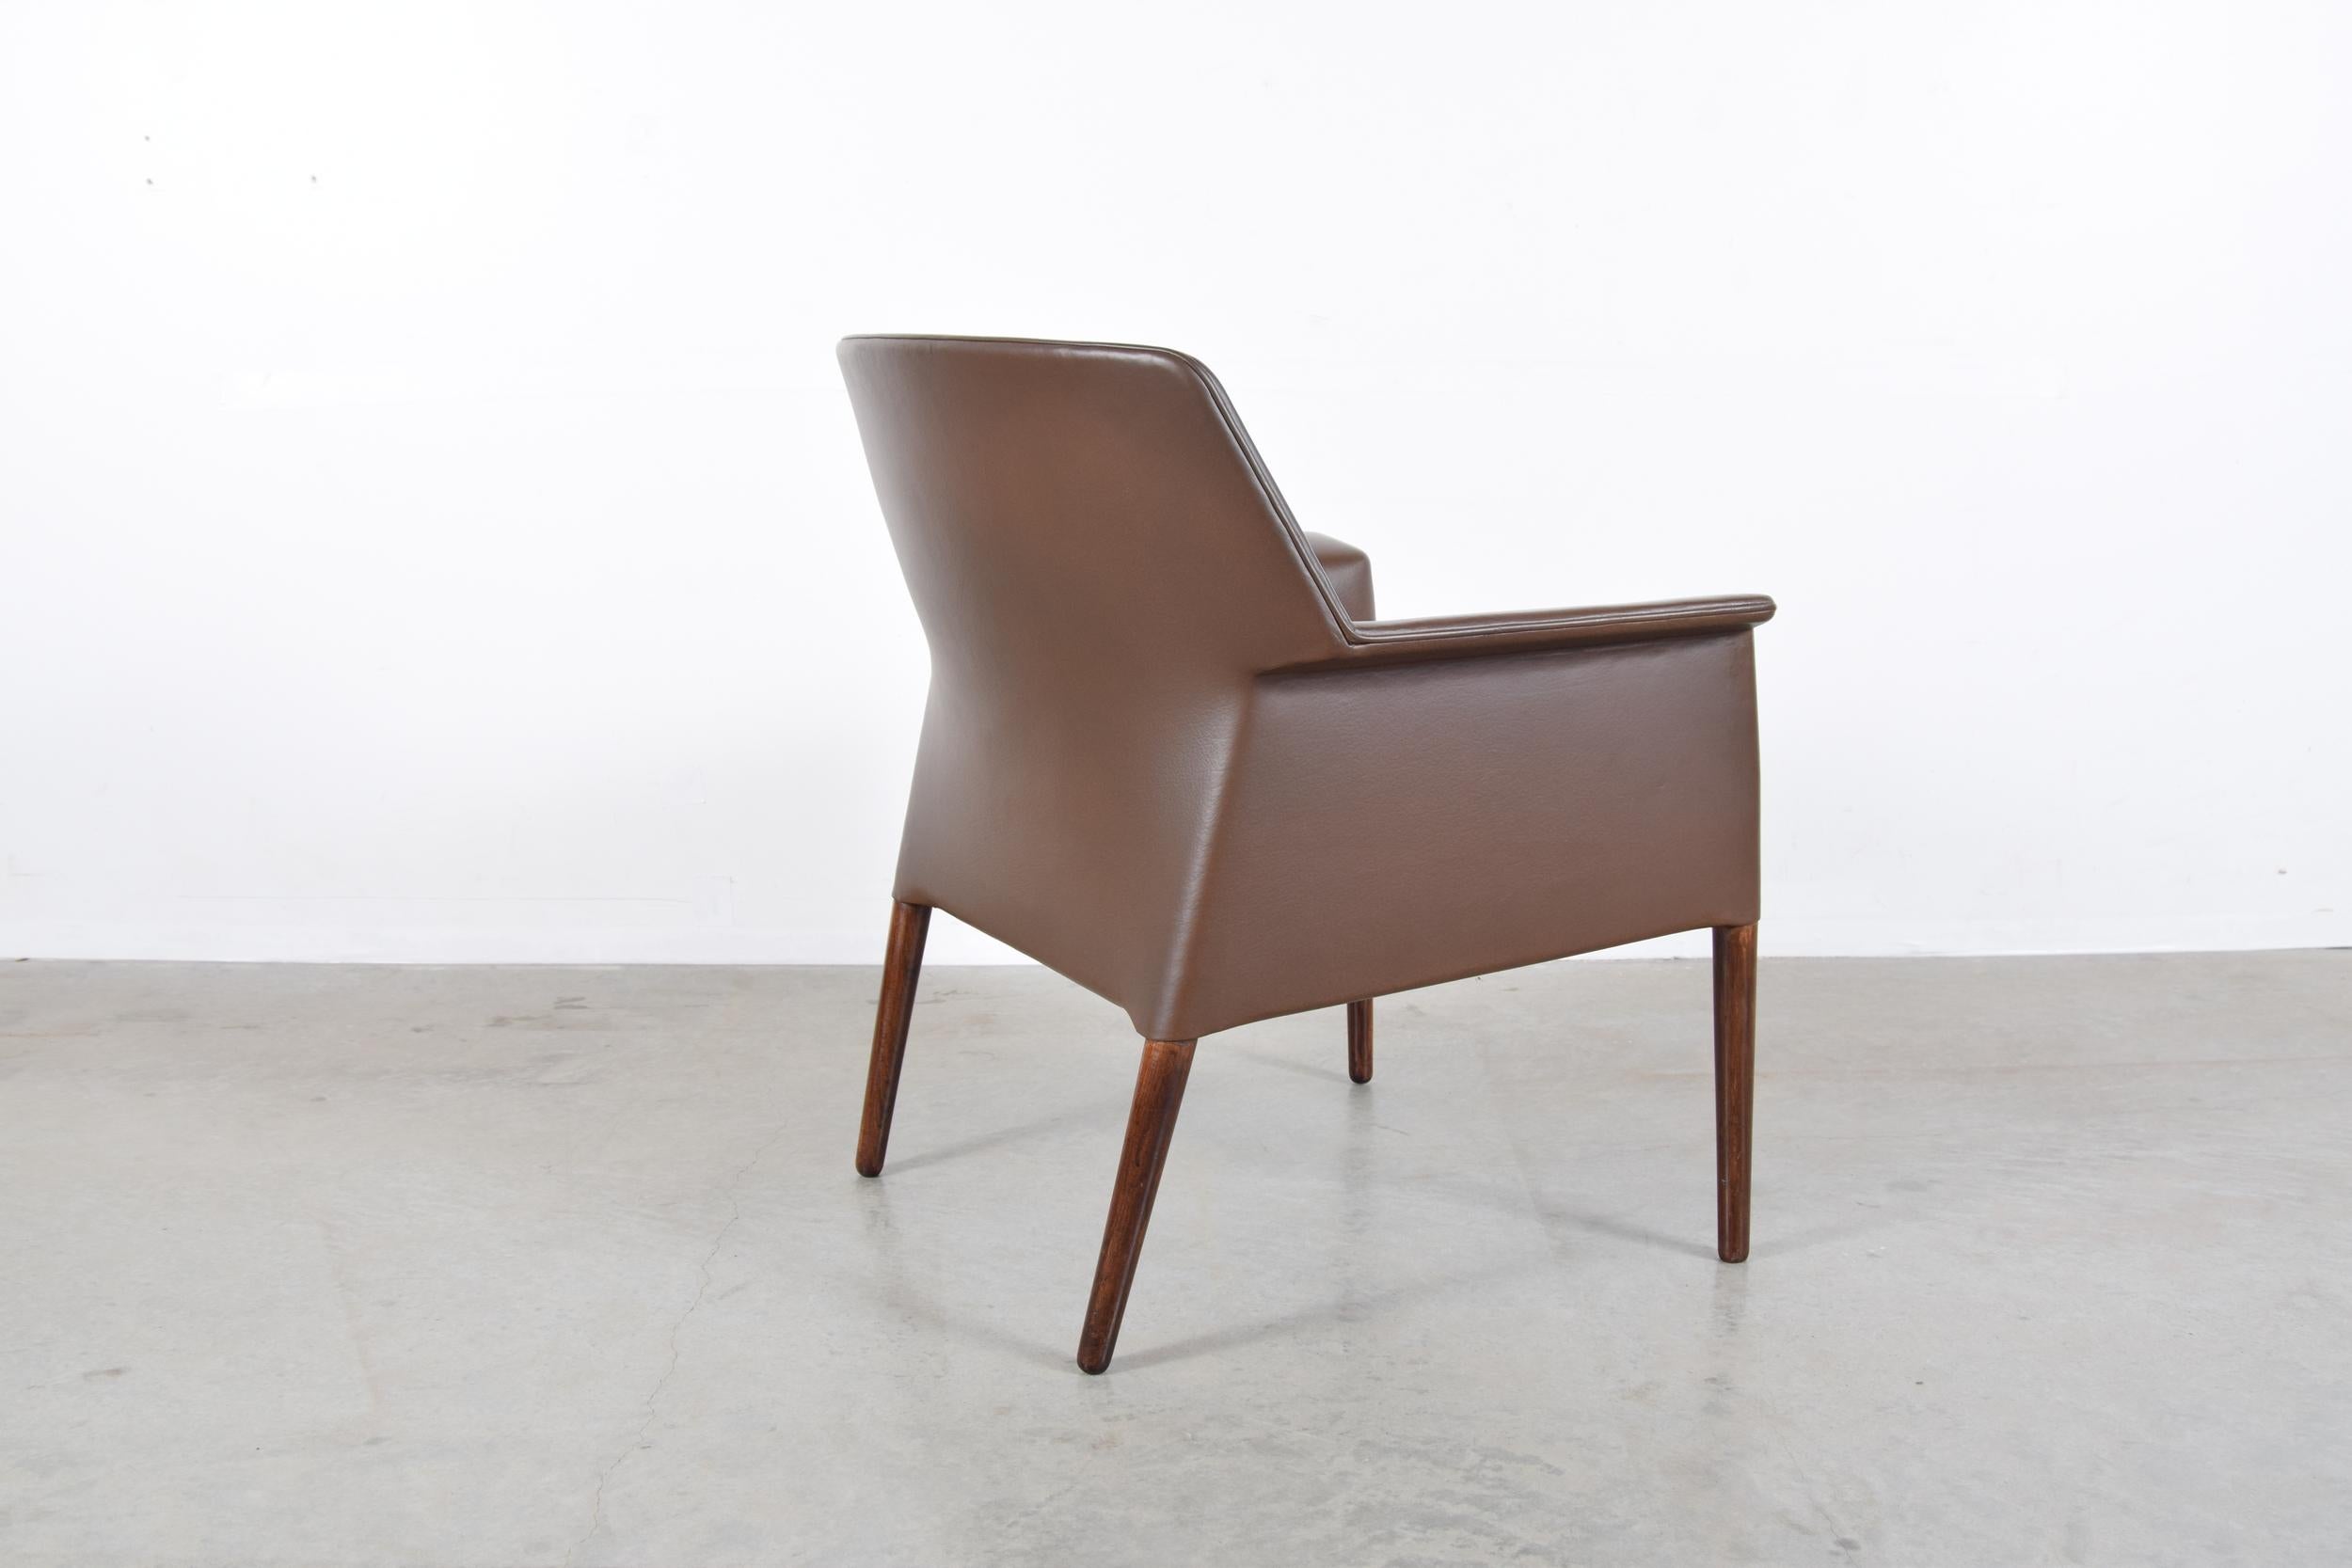 20th Century Leather Lounge Chair by Ejnar Larsen & Aksel Bender Madsen, Denmark, 1950s For Sale